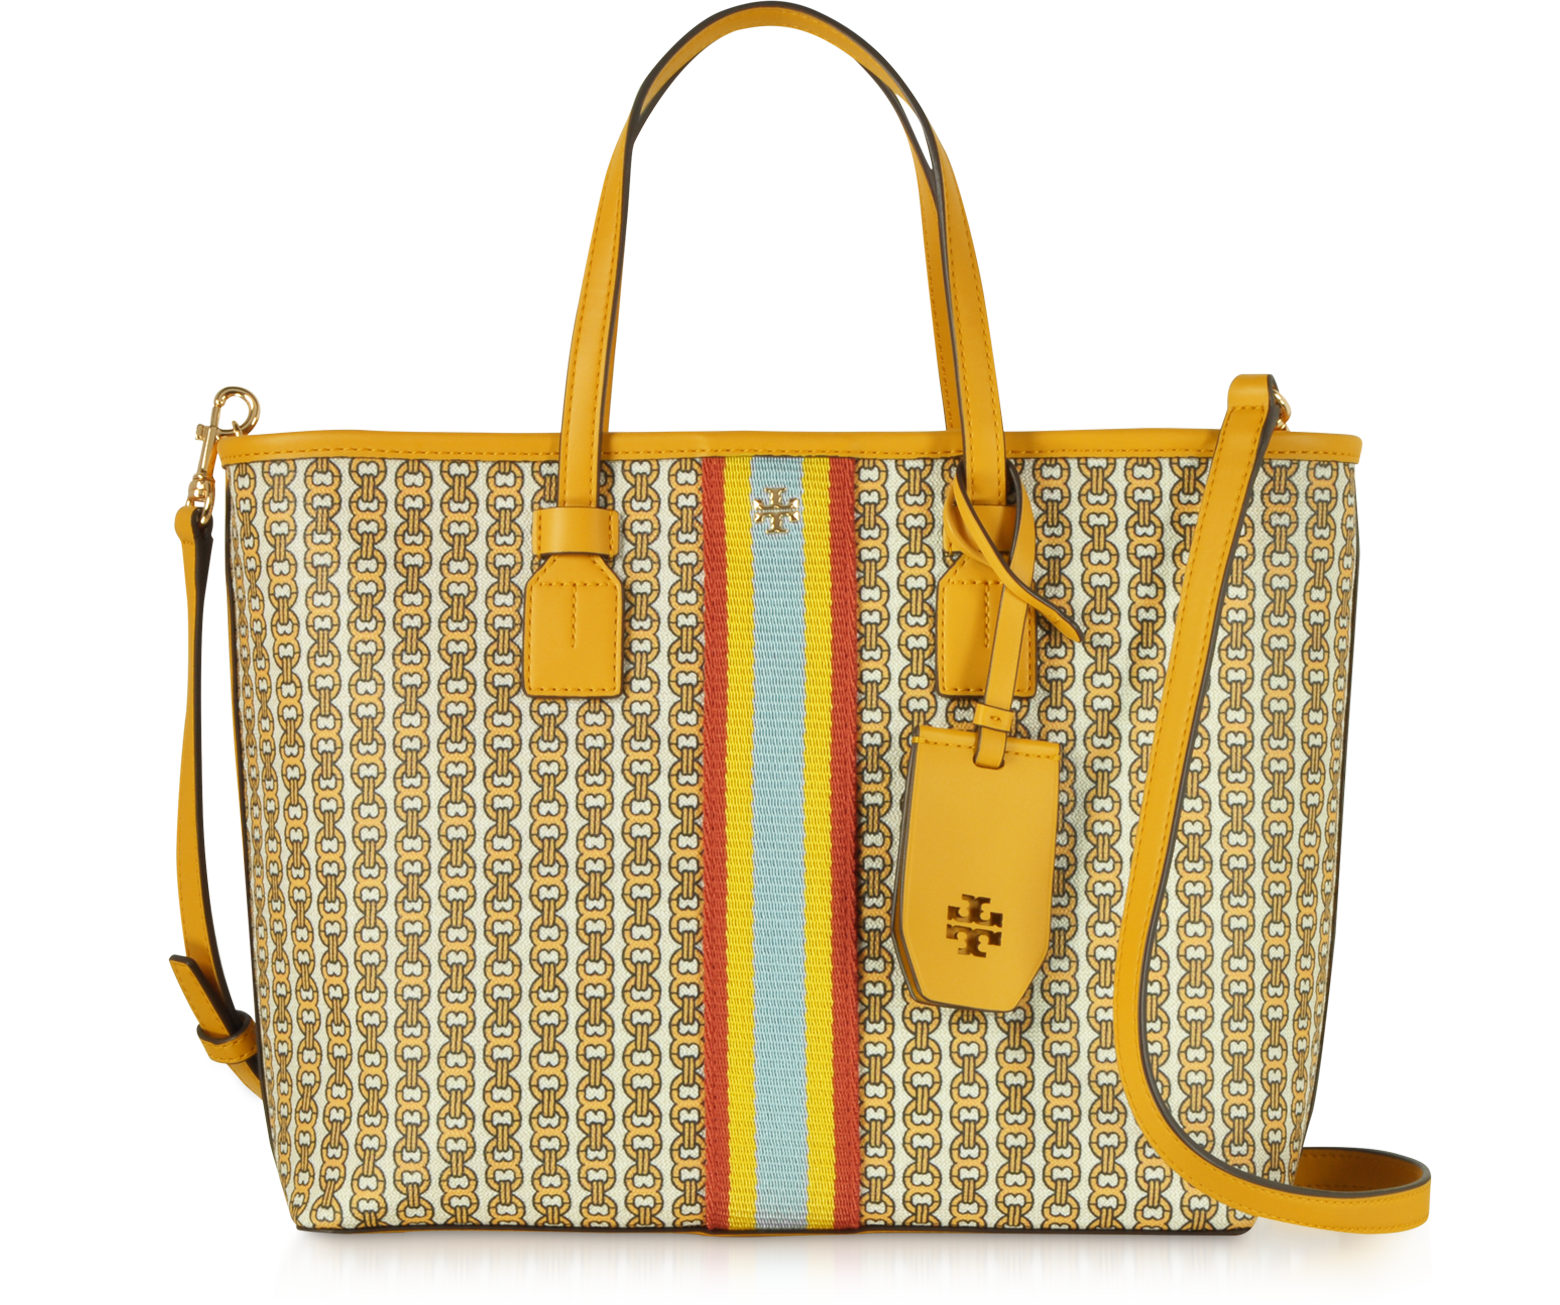 Totes bags Tory Burch - Gemini Link coated canvas small tote